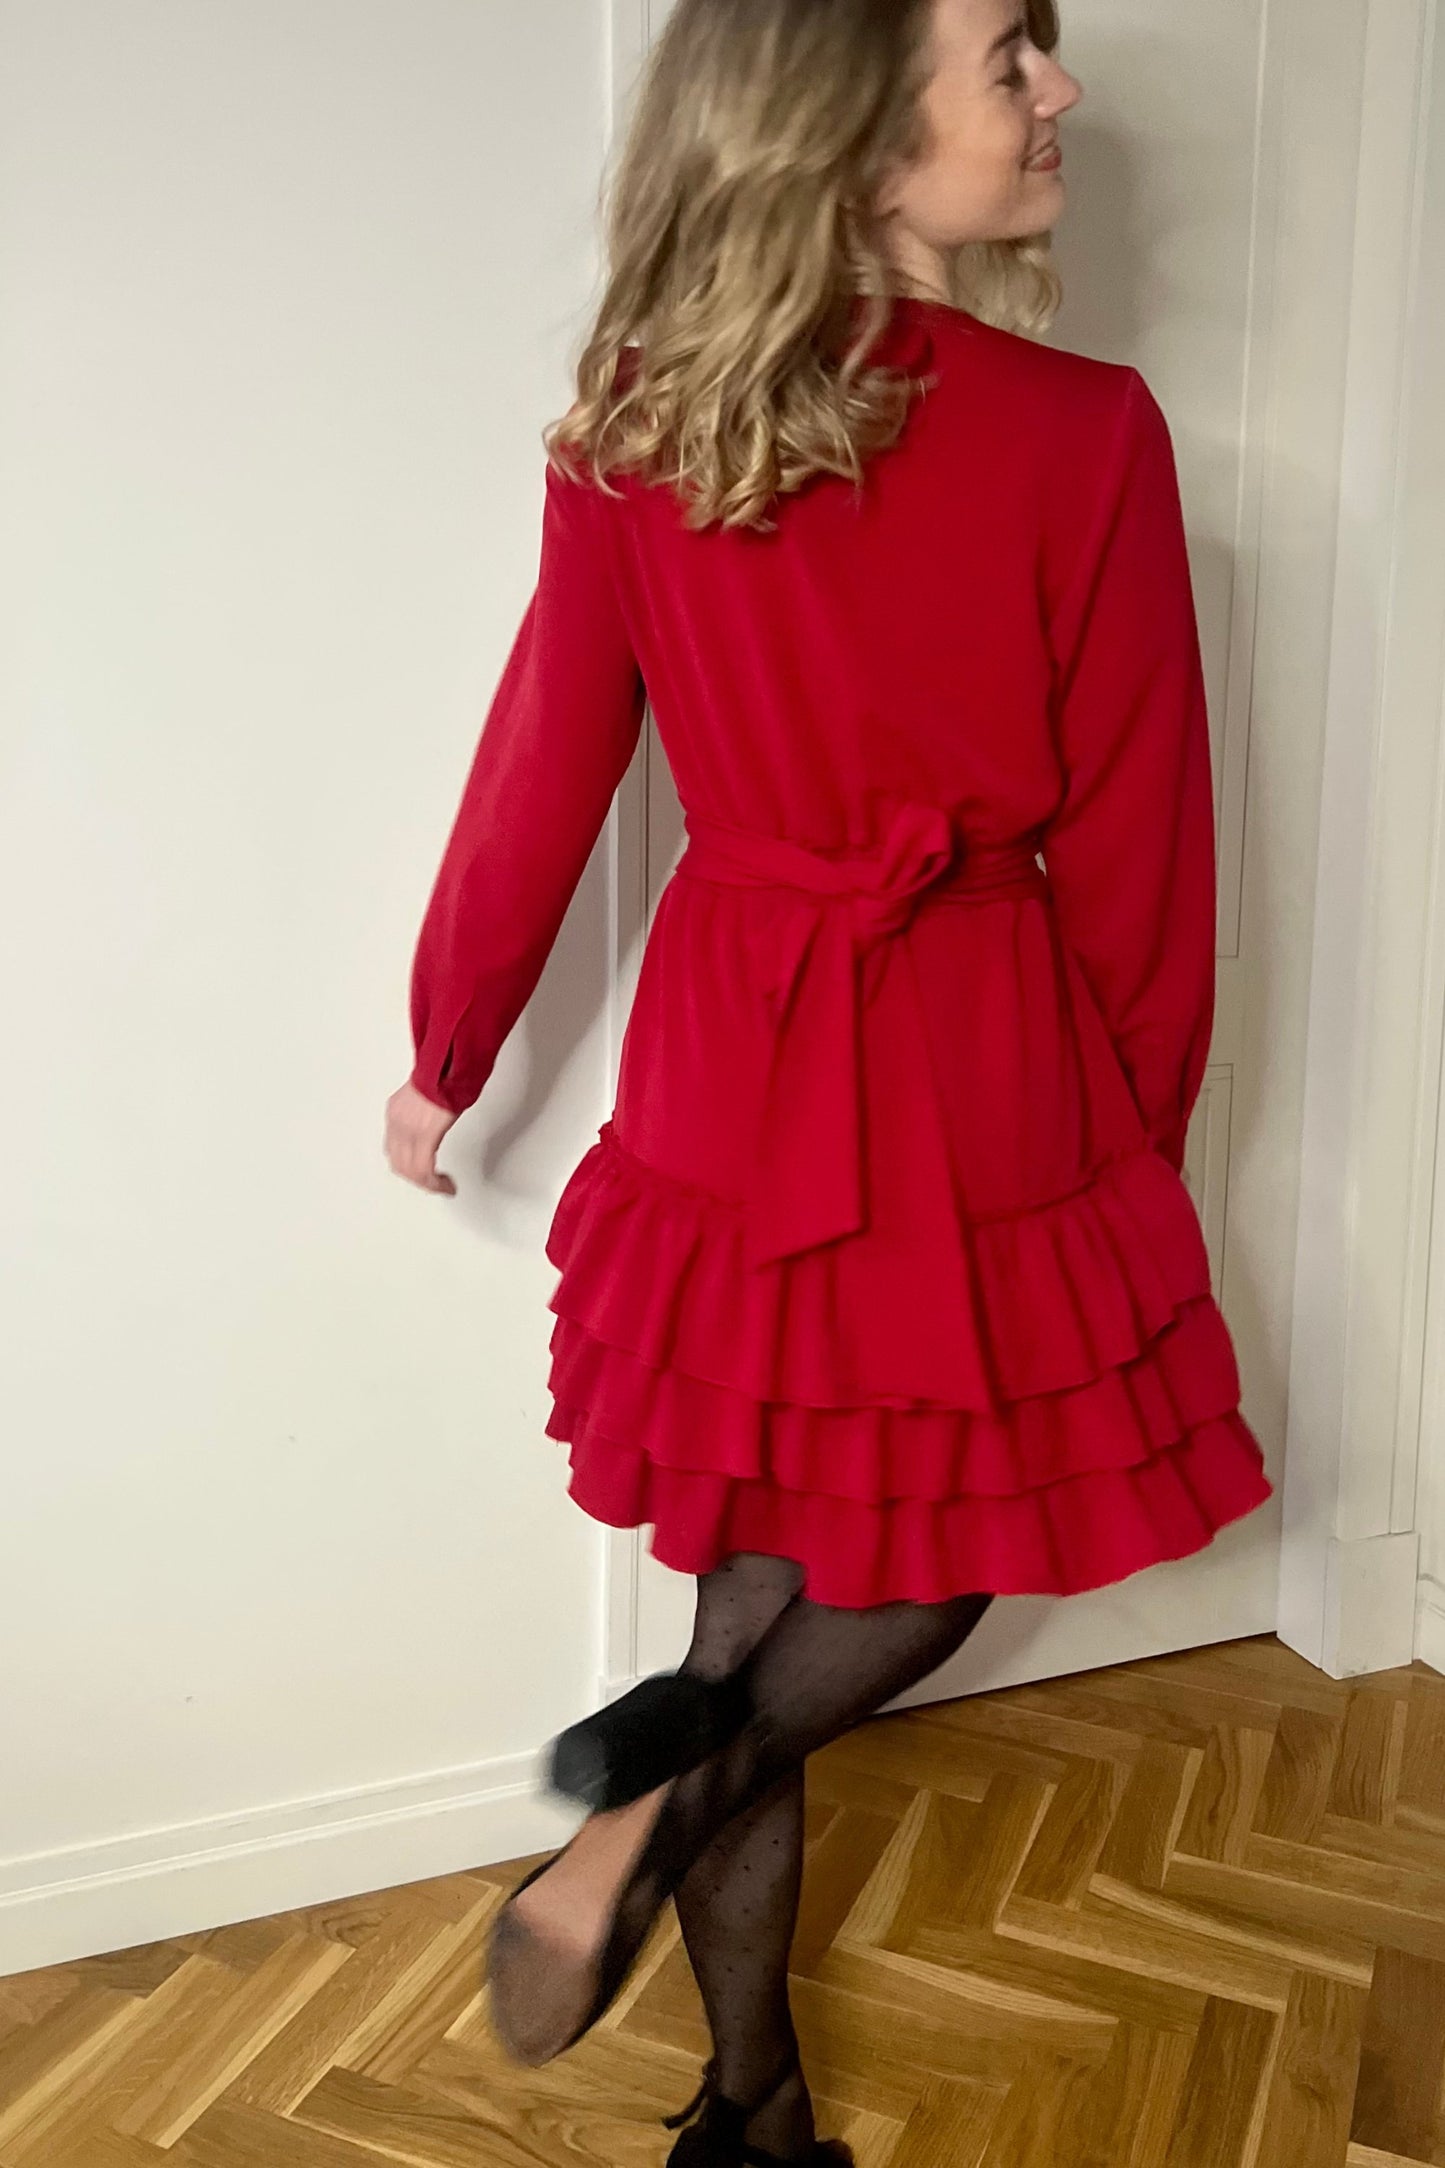 Red dress with ruffles